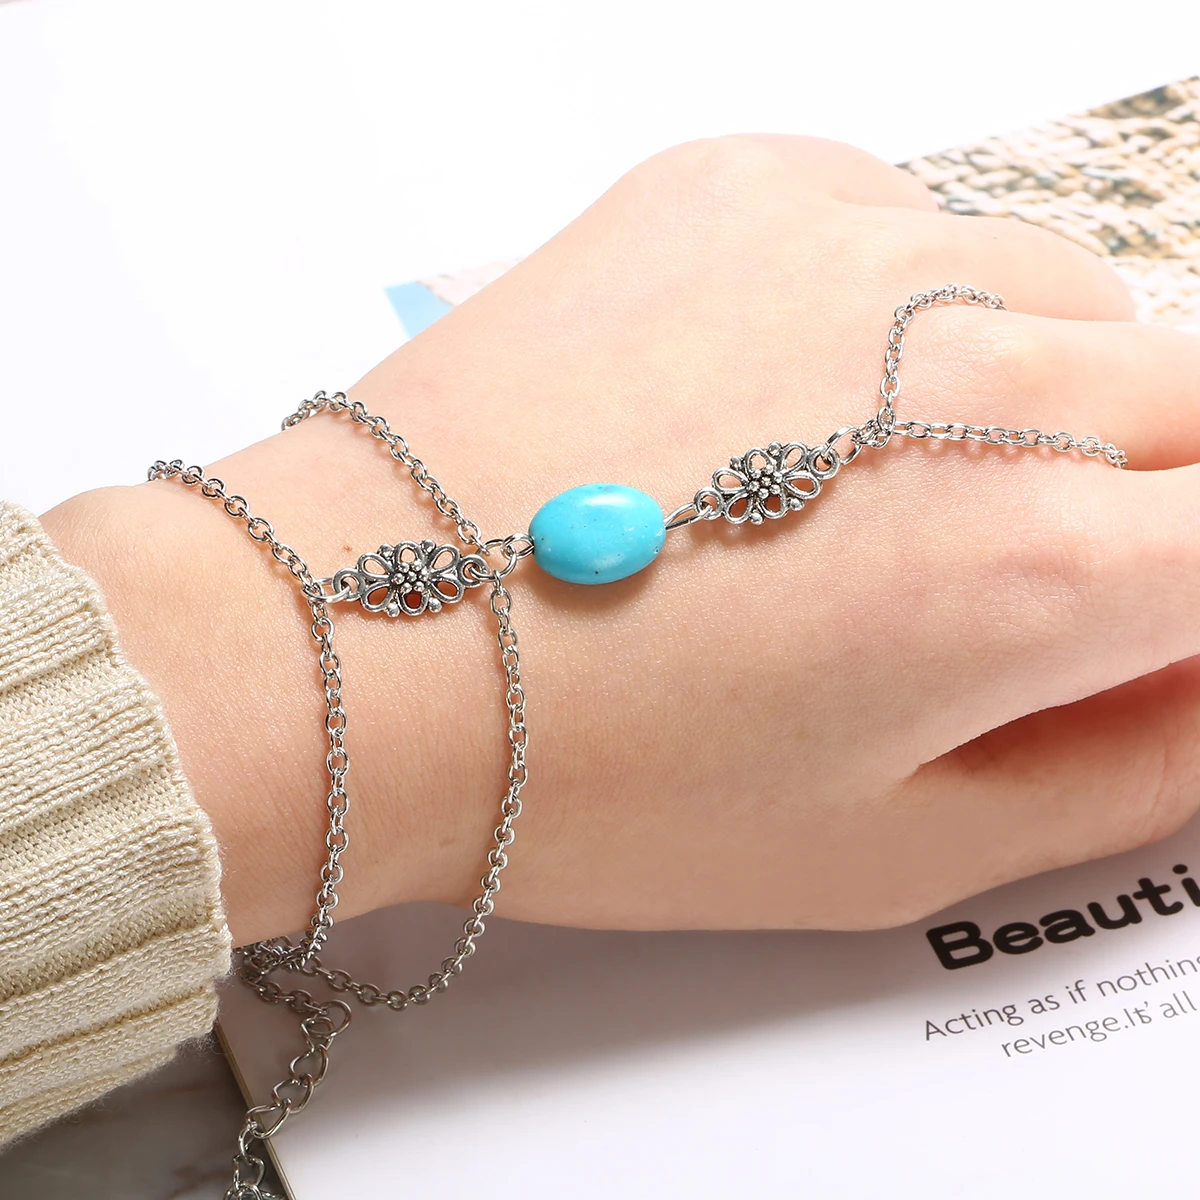 Fashion Chain Bracelet Drop Punk Silver Plated Women Metal Hand Harness Chain Turquoise Beads Slave Finger Ring Boho Jewelry